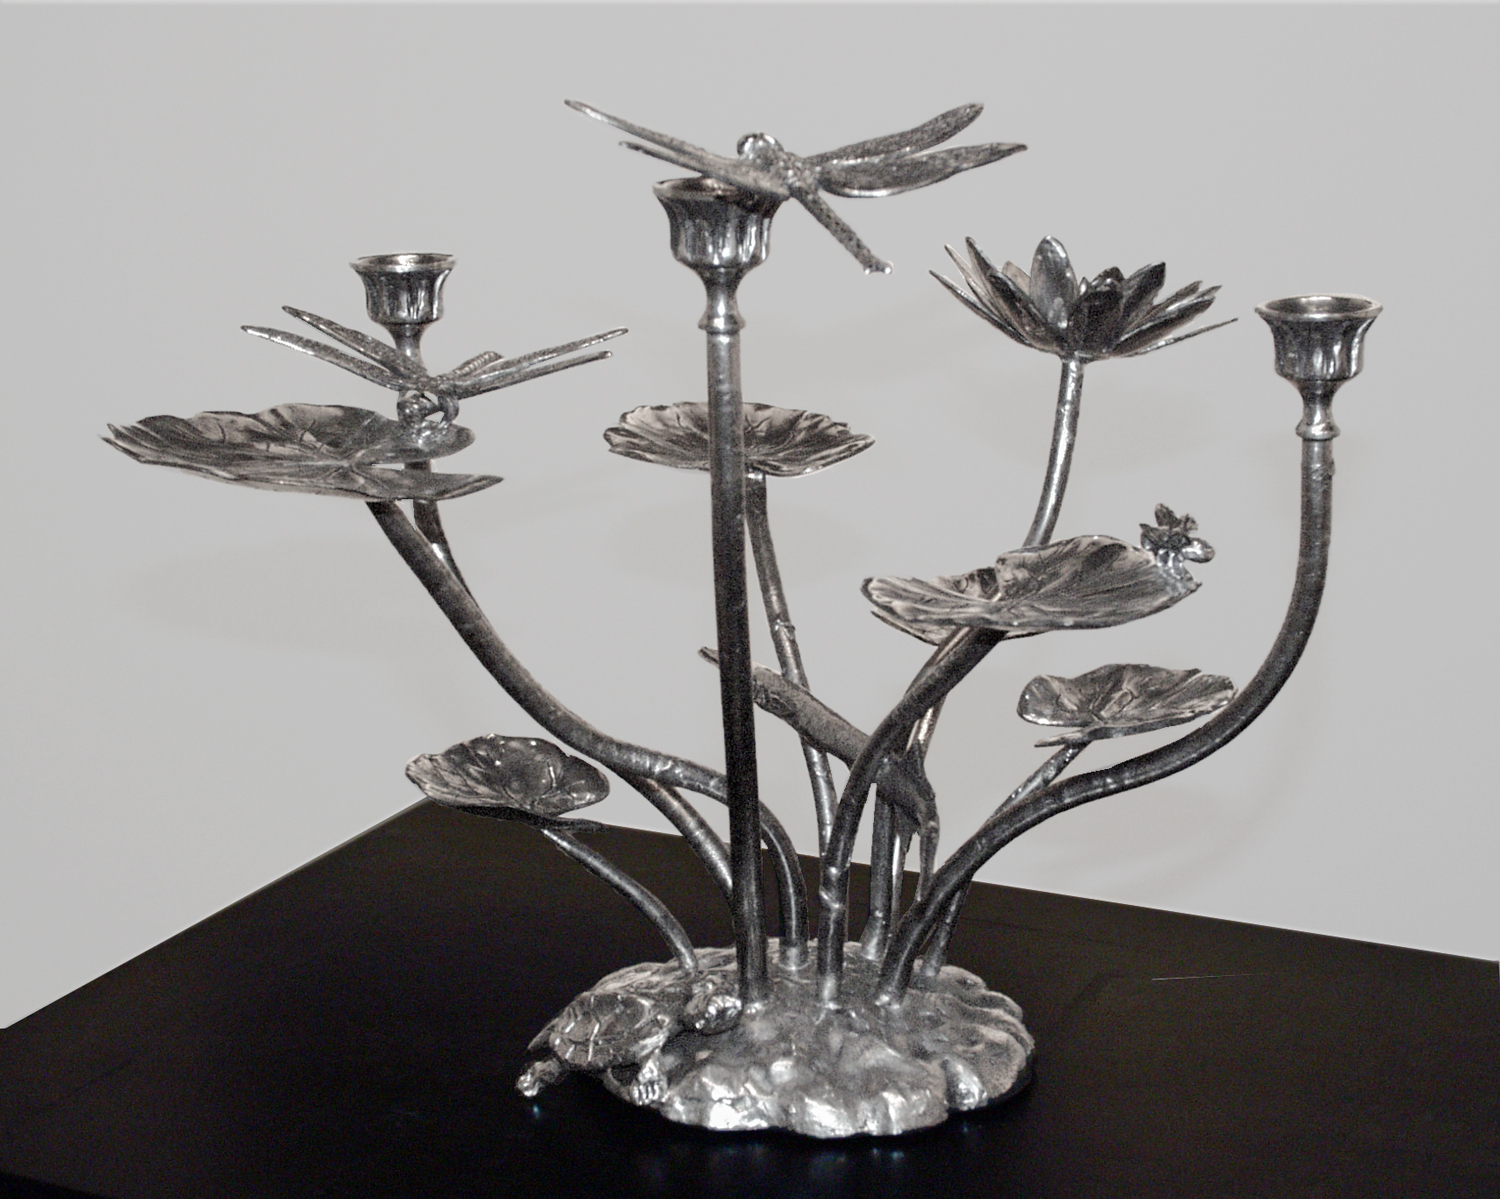 Waterlily Tripple Candle Holder by Charles H. Reinike III